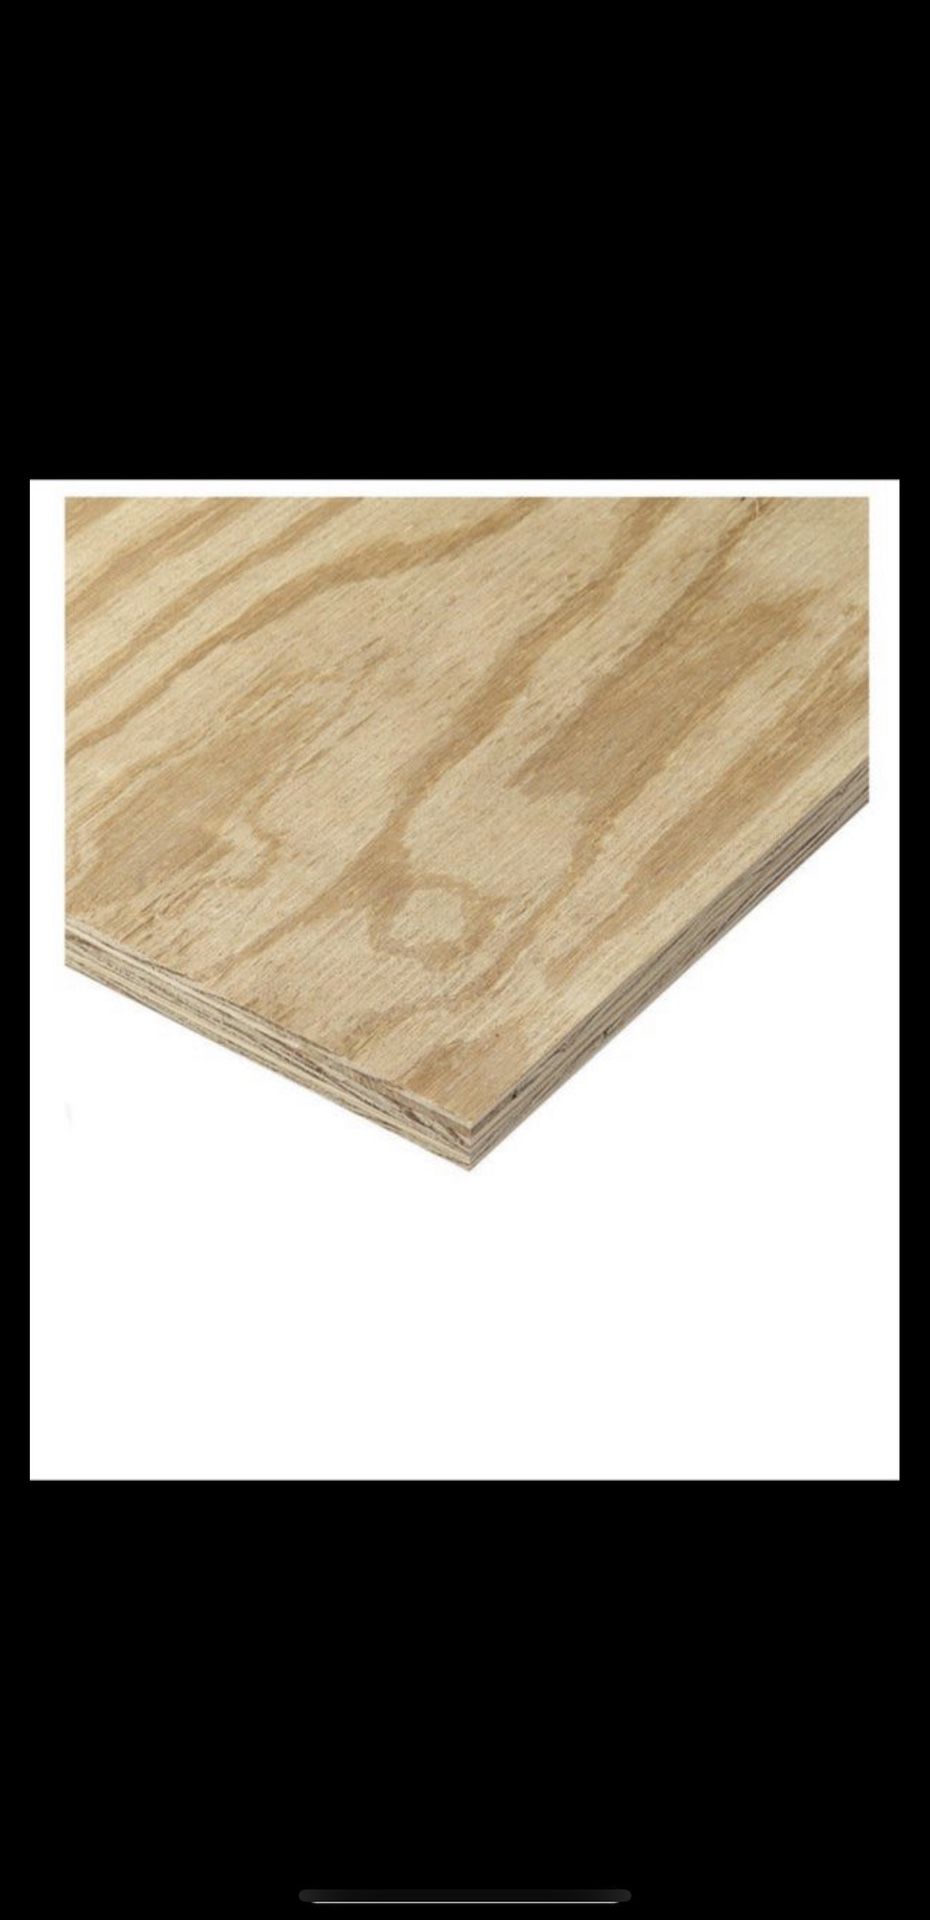 5/8 Plywood full sheets 4’x8’ NEW